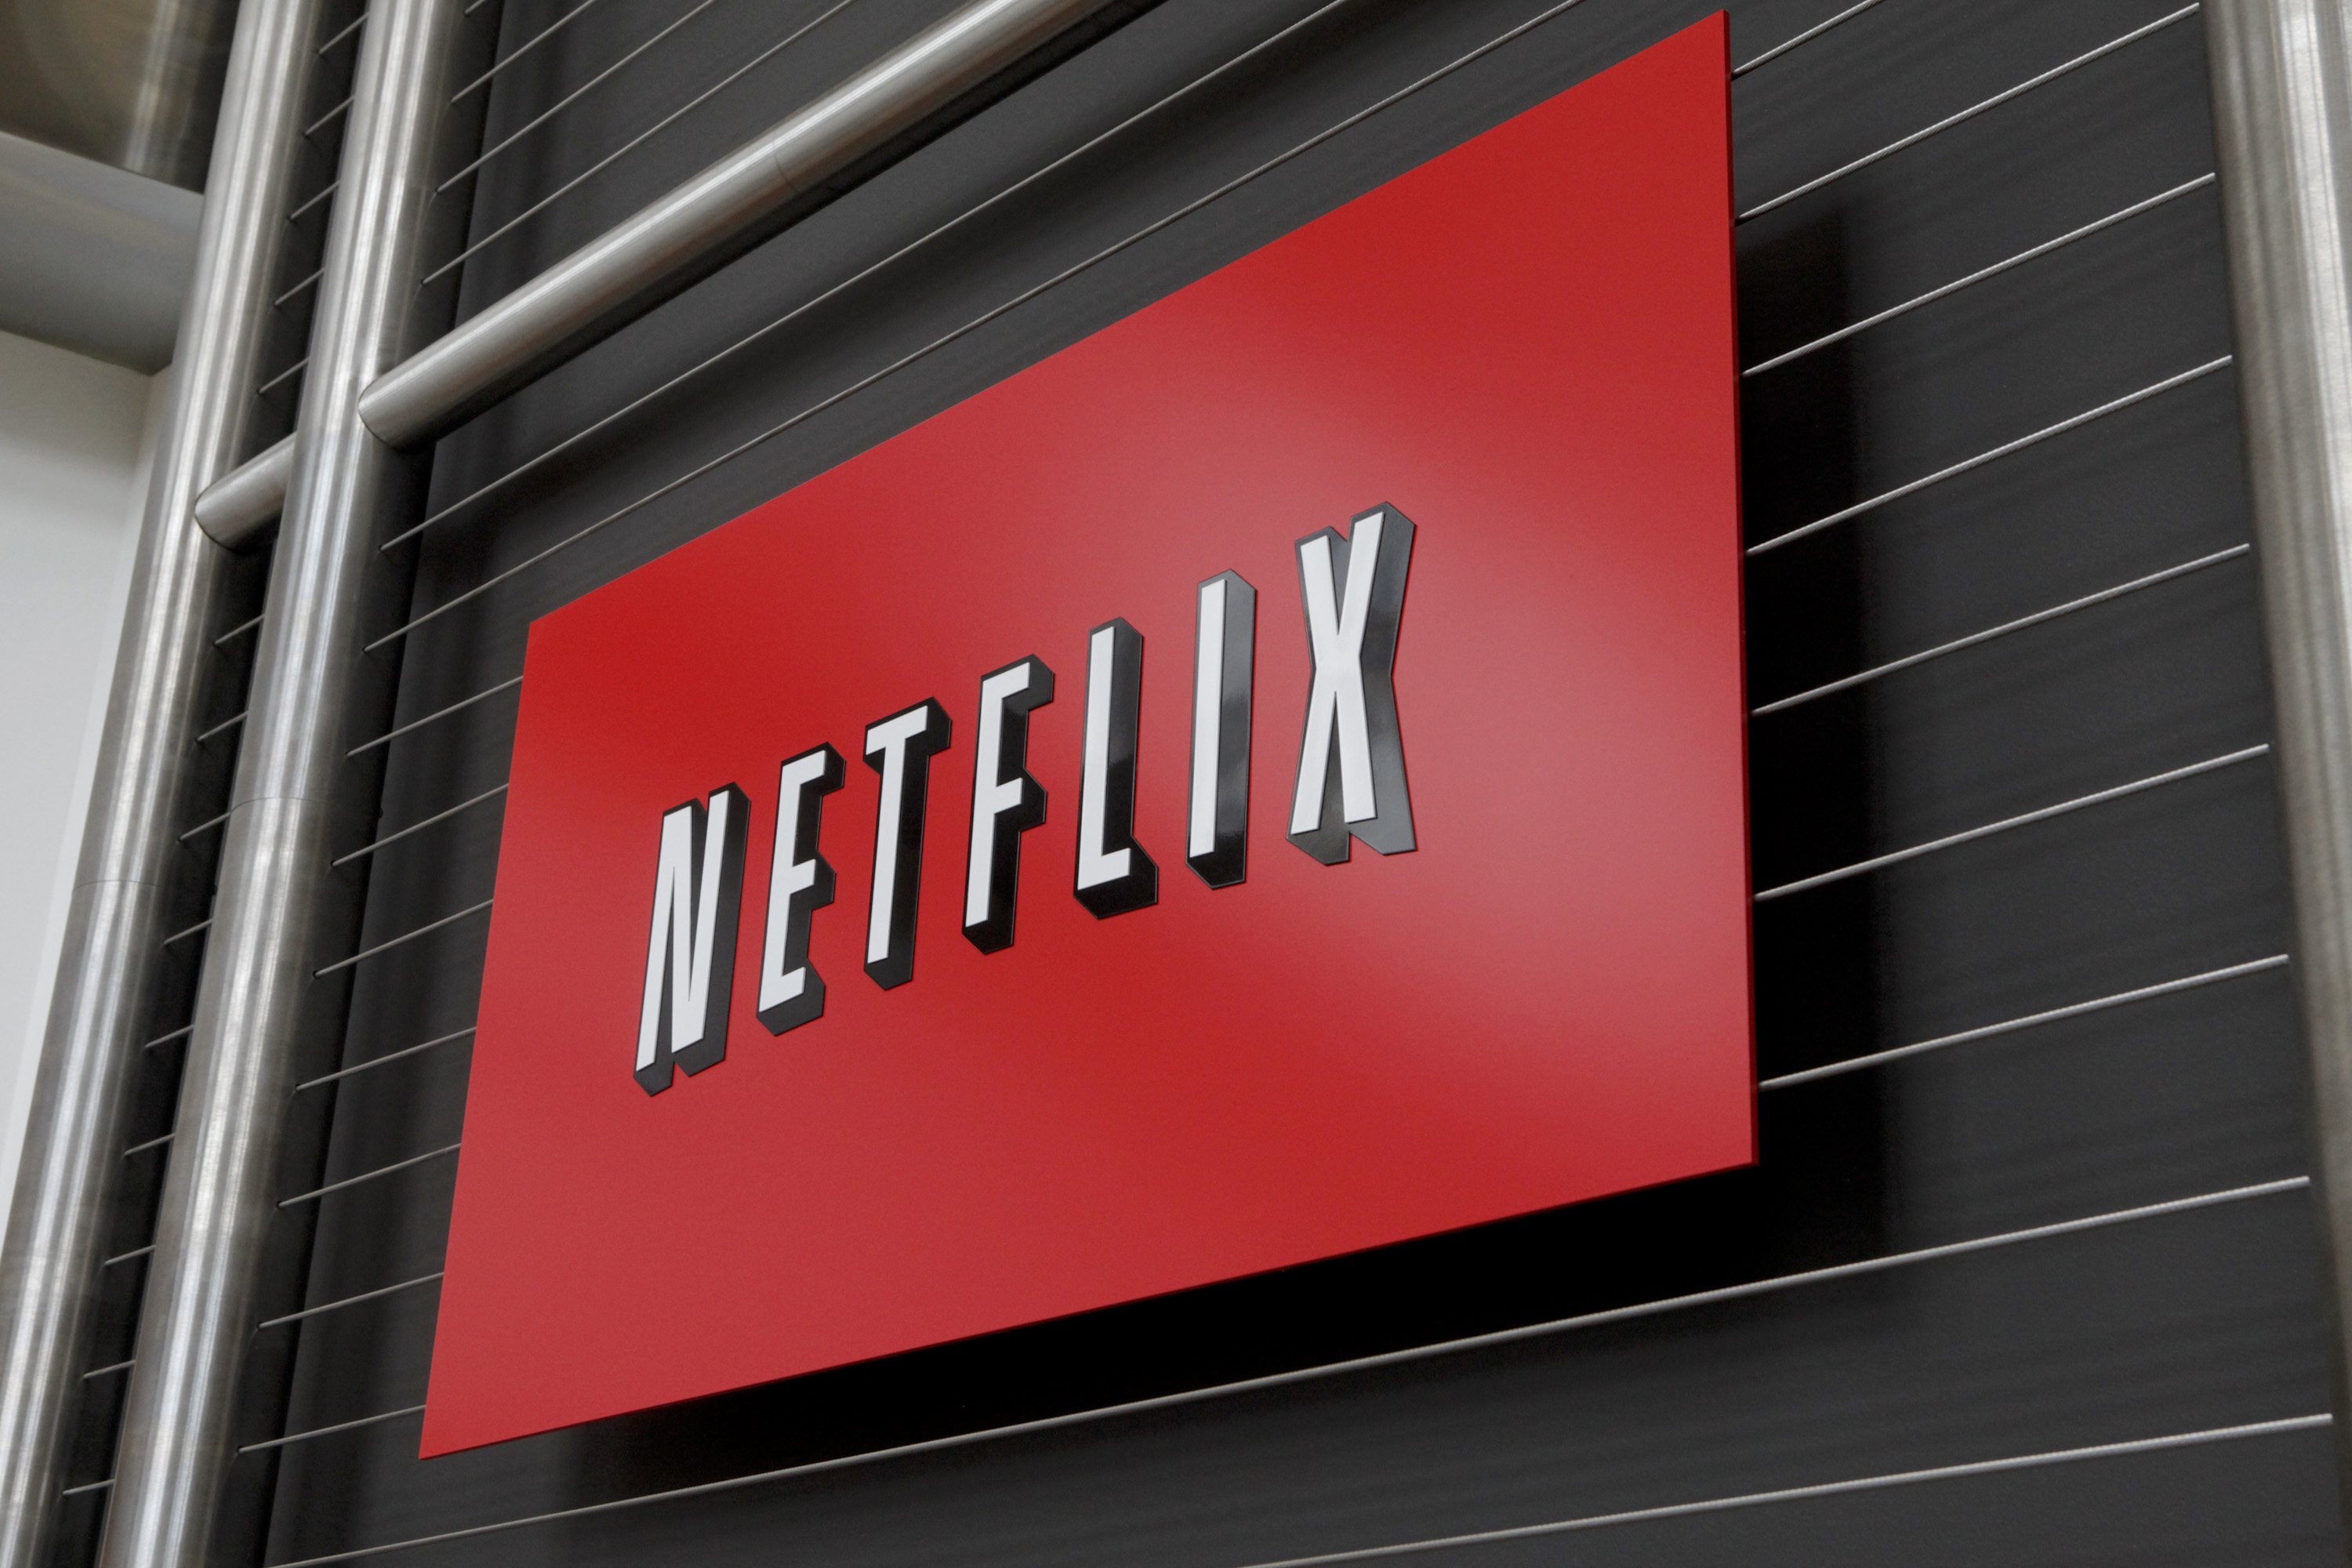 The Netflix company logo at Netflix headquarters in Los Gatos, Calif., on April 13, 2011. (Ryan Anson—AFP/Getty Images)